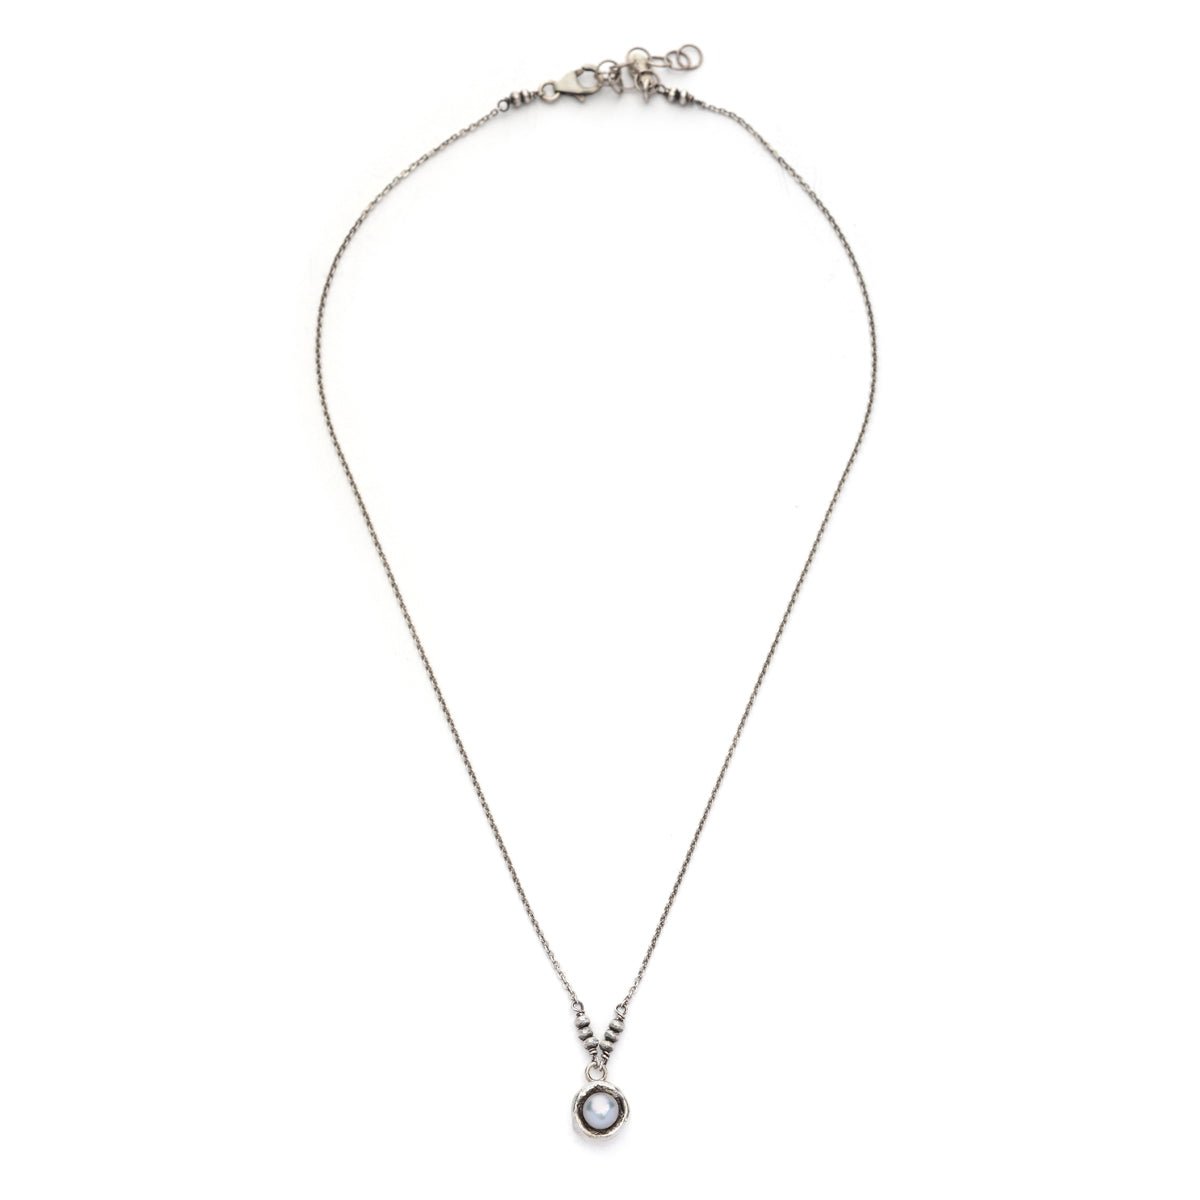 DPX652N - Necklaces